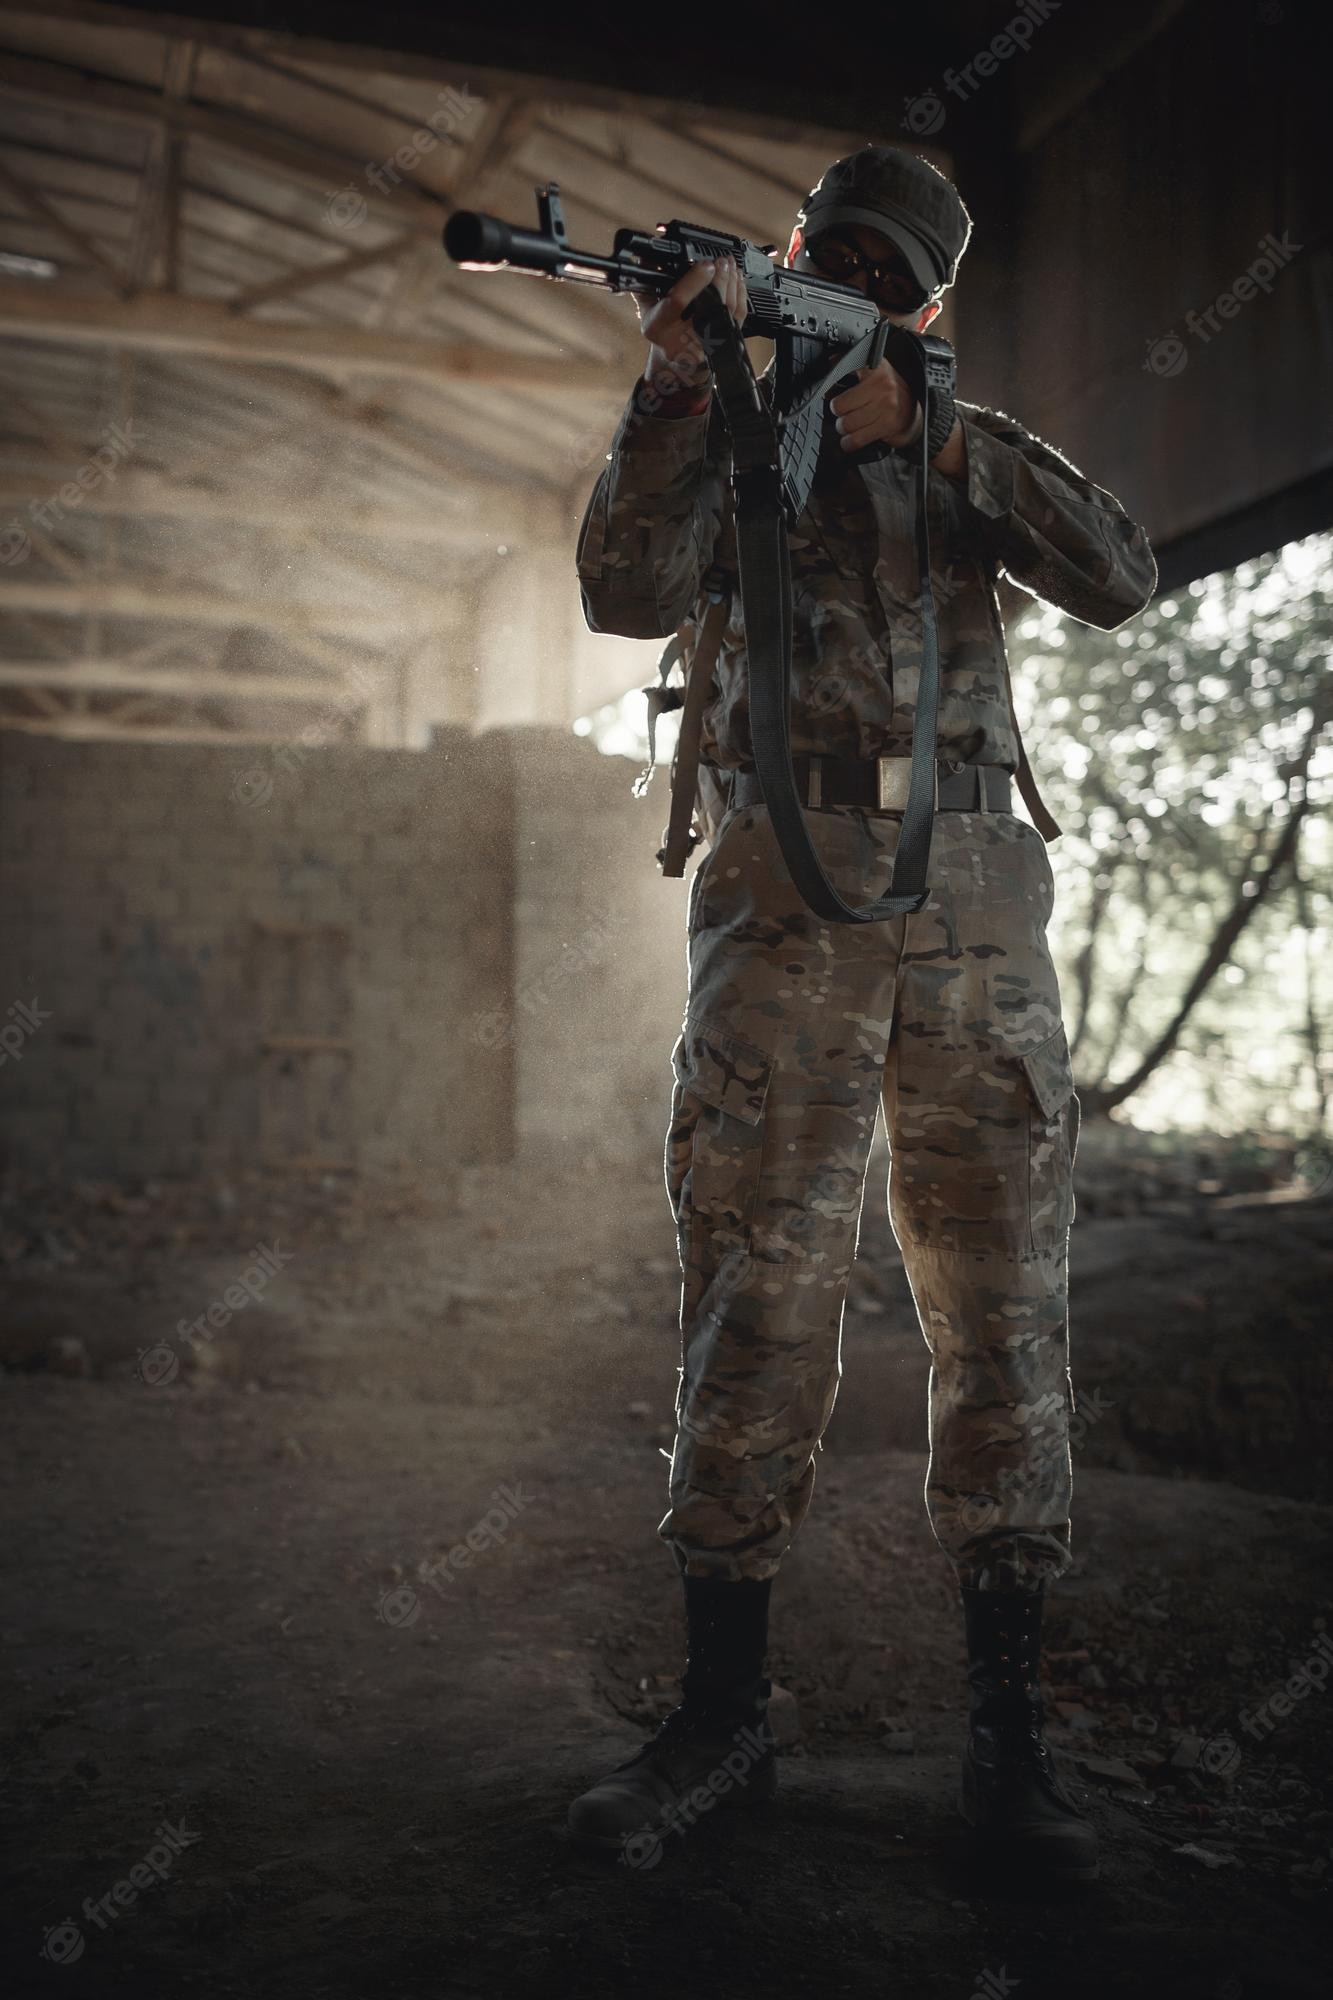 Premium Photo. A fearless soldier in a camouflage protective uniform in tactical black glasses and in a cap with a machine gun in his hands stands inside a large permitted house